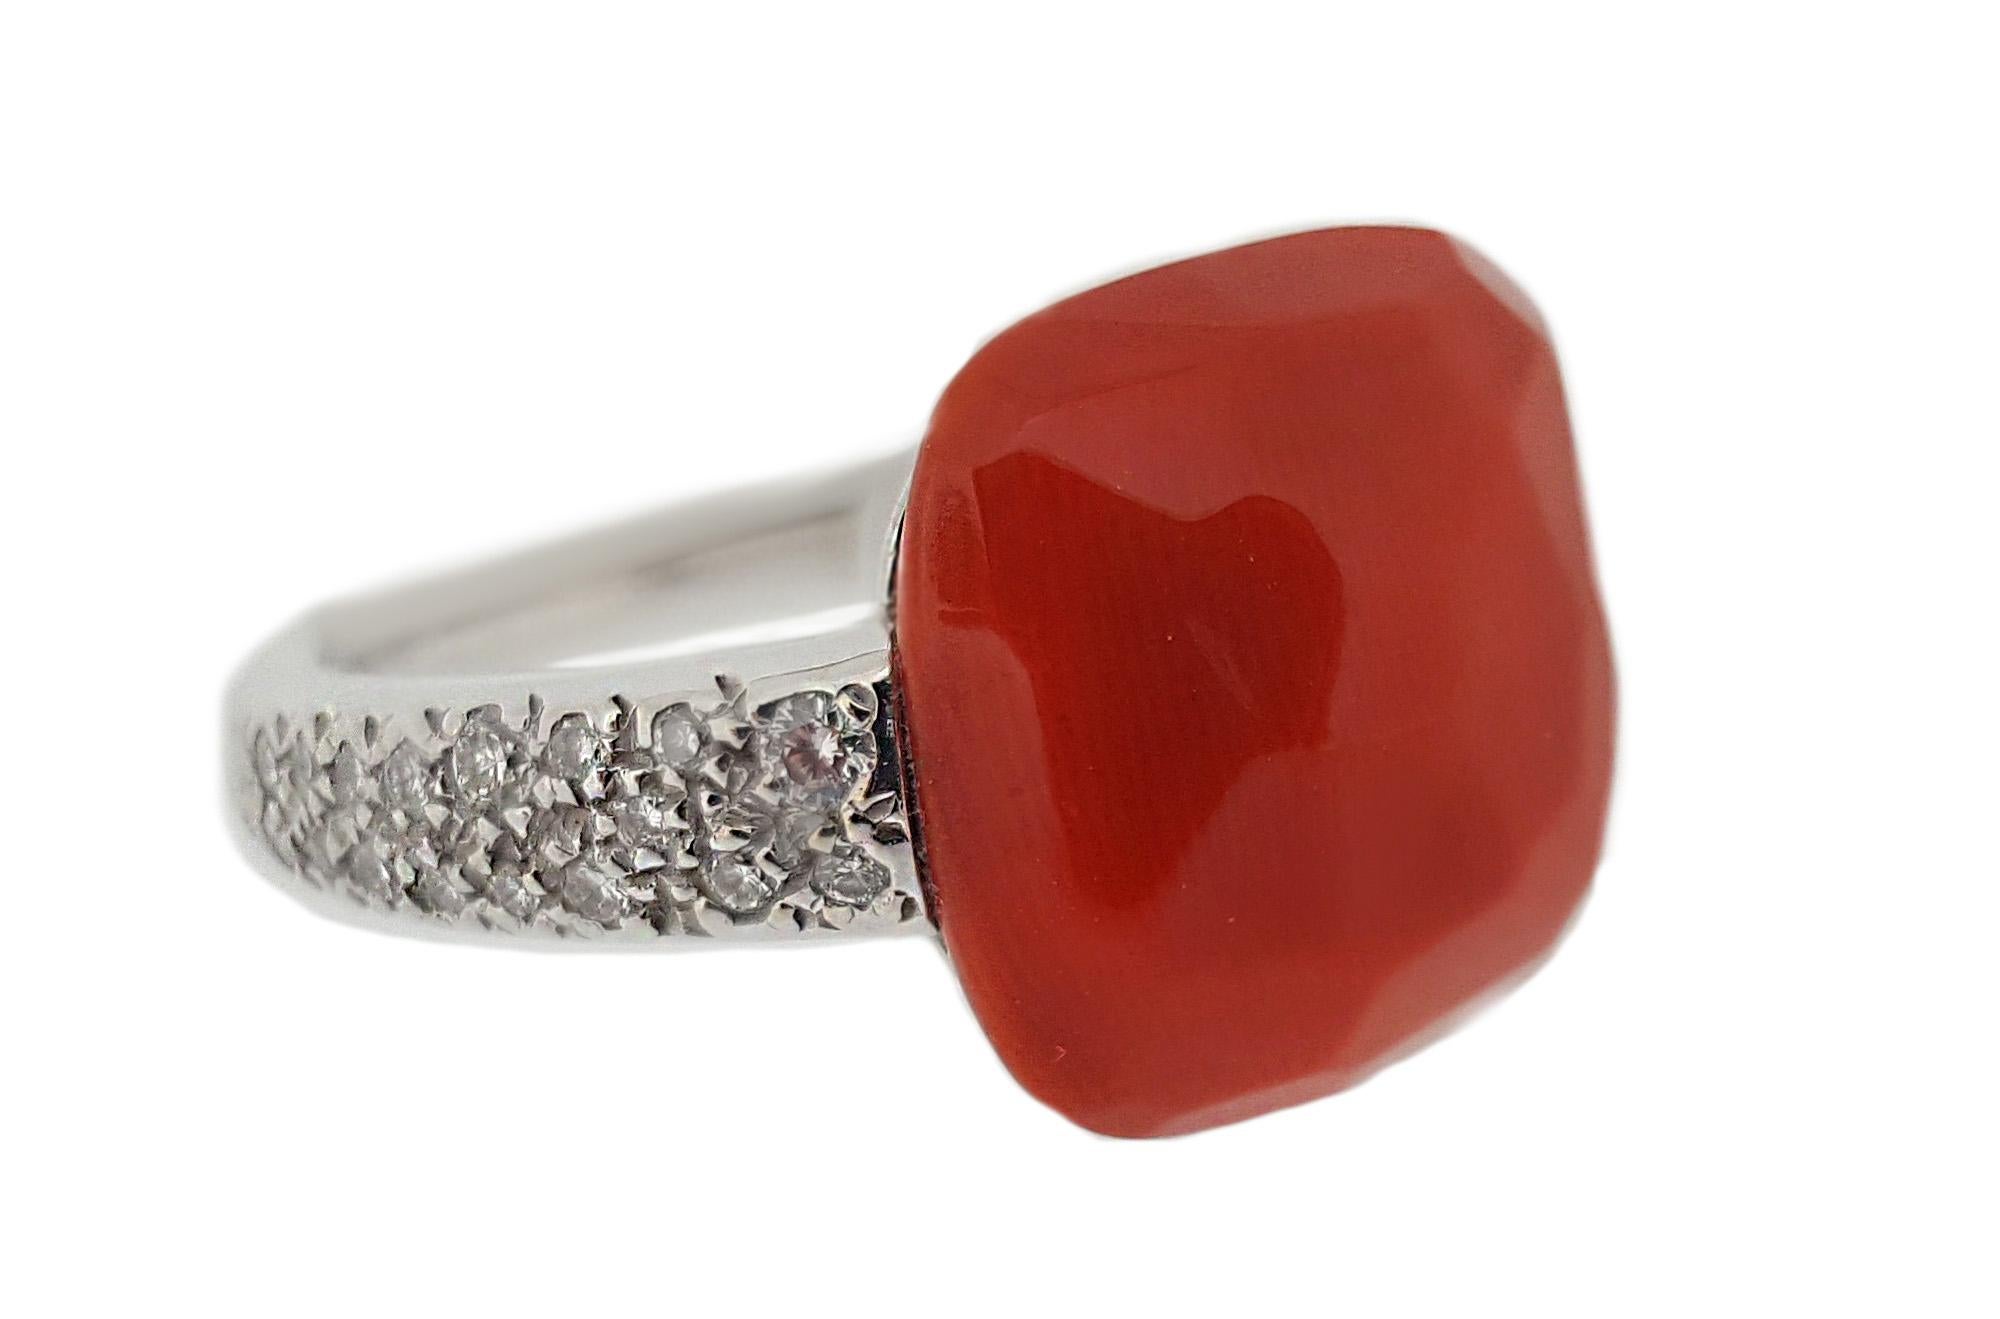 This modern and elegant designer ring by Pomellato  features a vivid salmon colored, faceted, cushion shaped coral.  Also contains .17ctw of full cut round brilliant diamonds along the shank of this high polished 18kt white gold mounting.